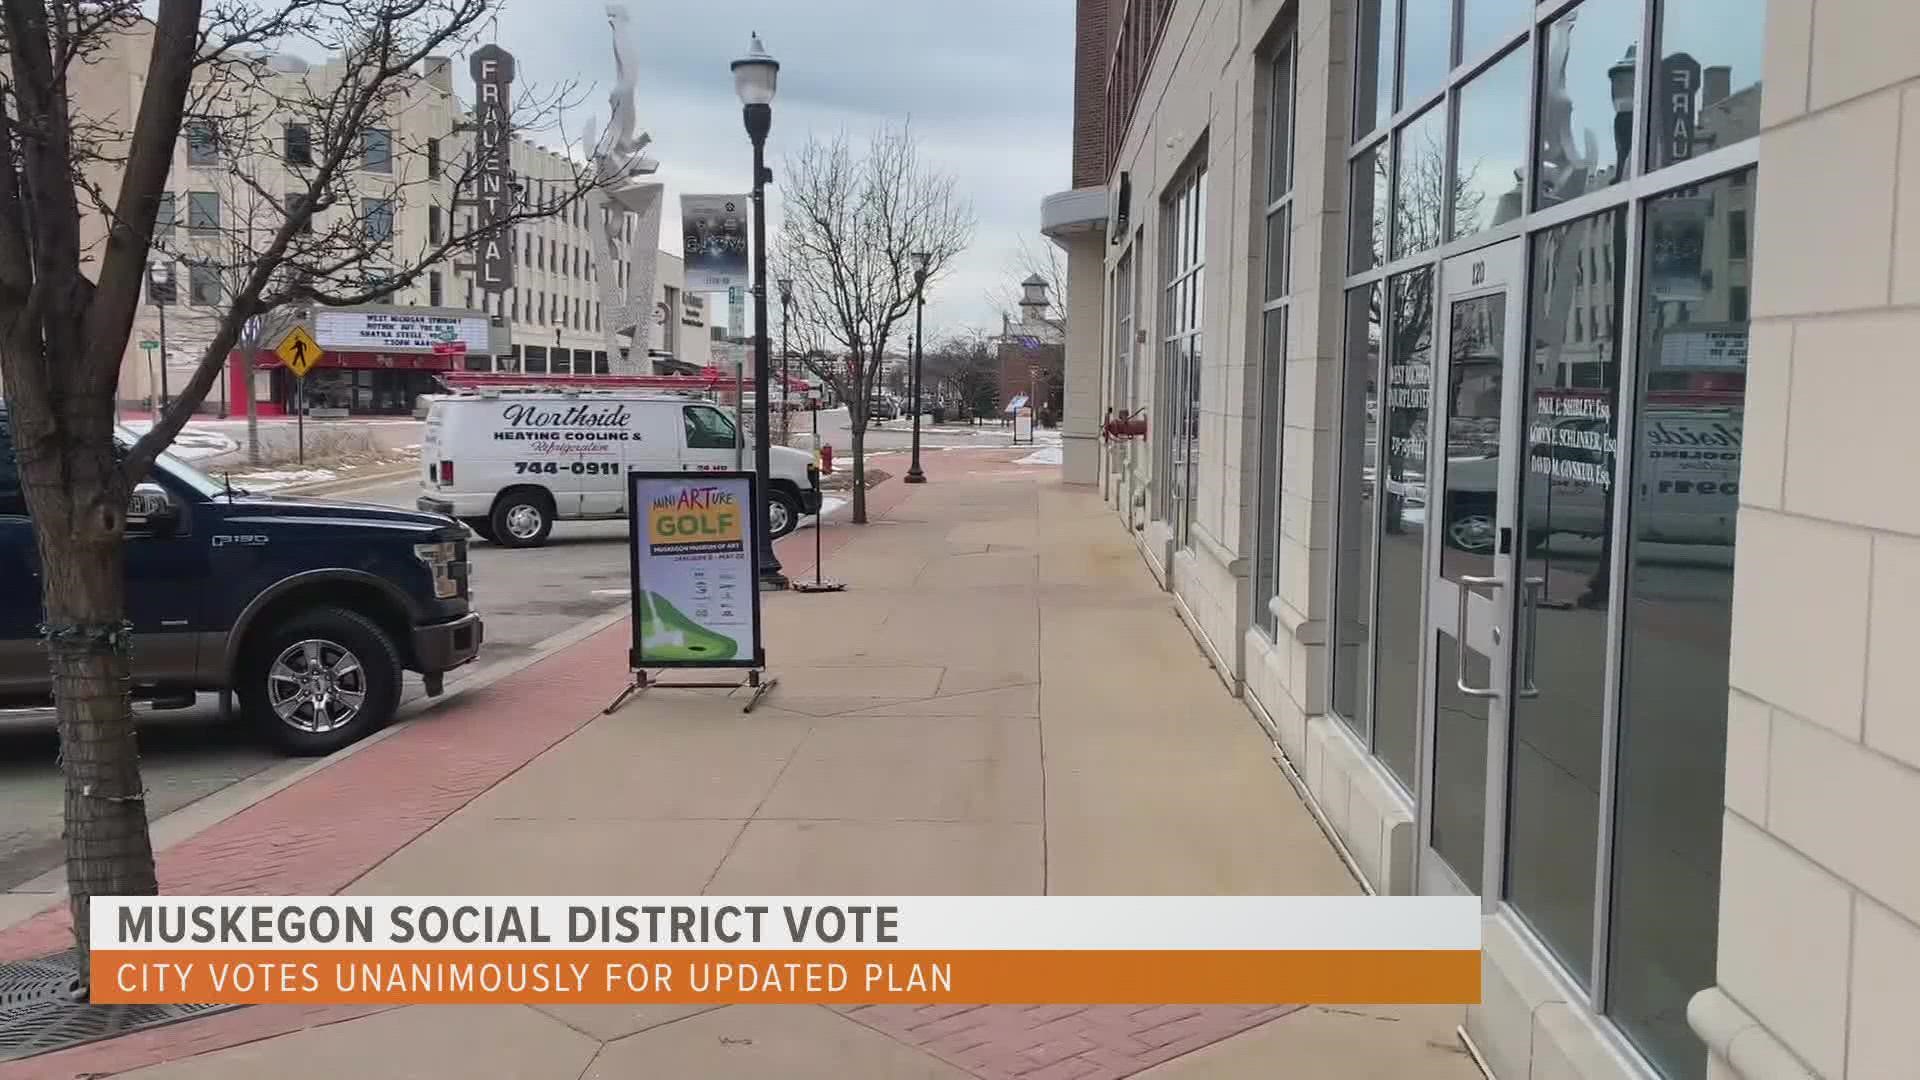 The amendment to the Muskegon Social District Plan passed at a city commissioners meeting Tuesday night.